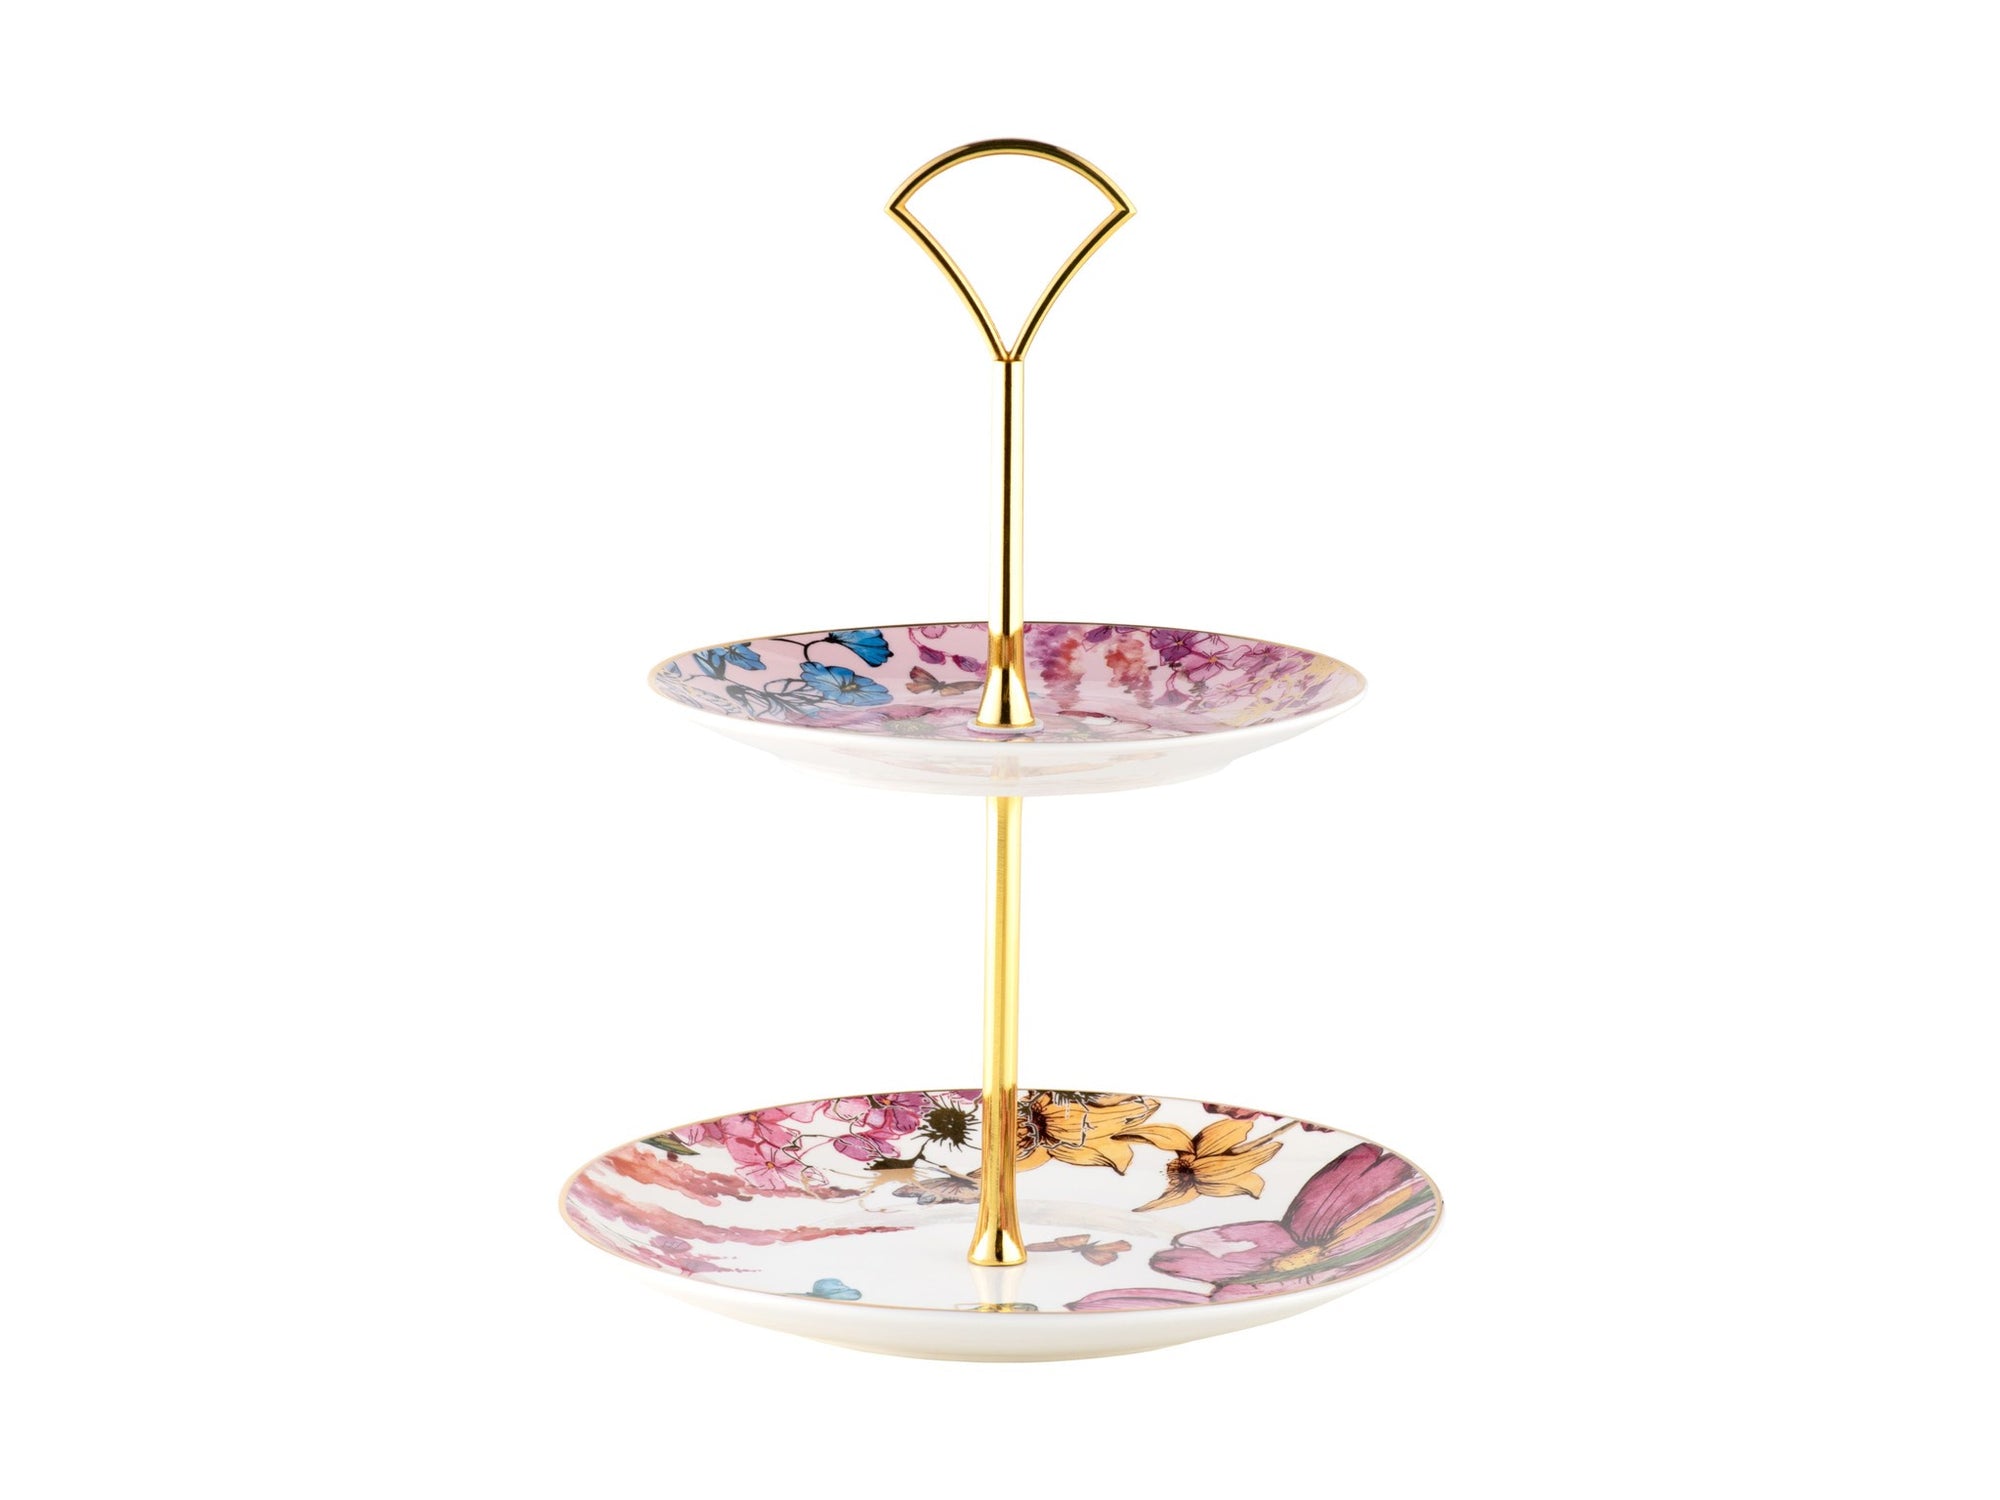 "Enchantment" 2 Tiered Cake Stand